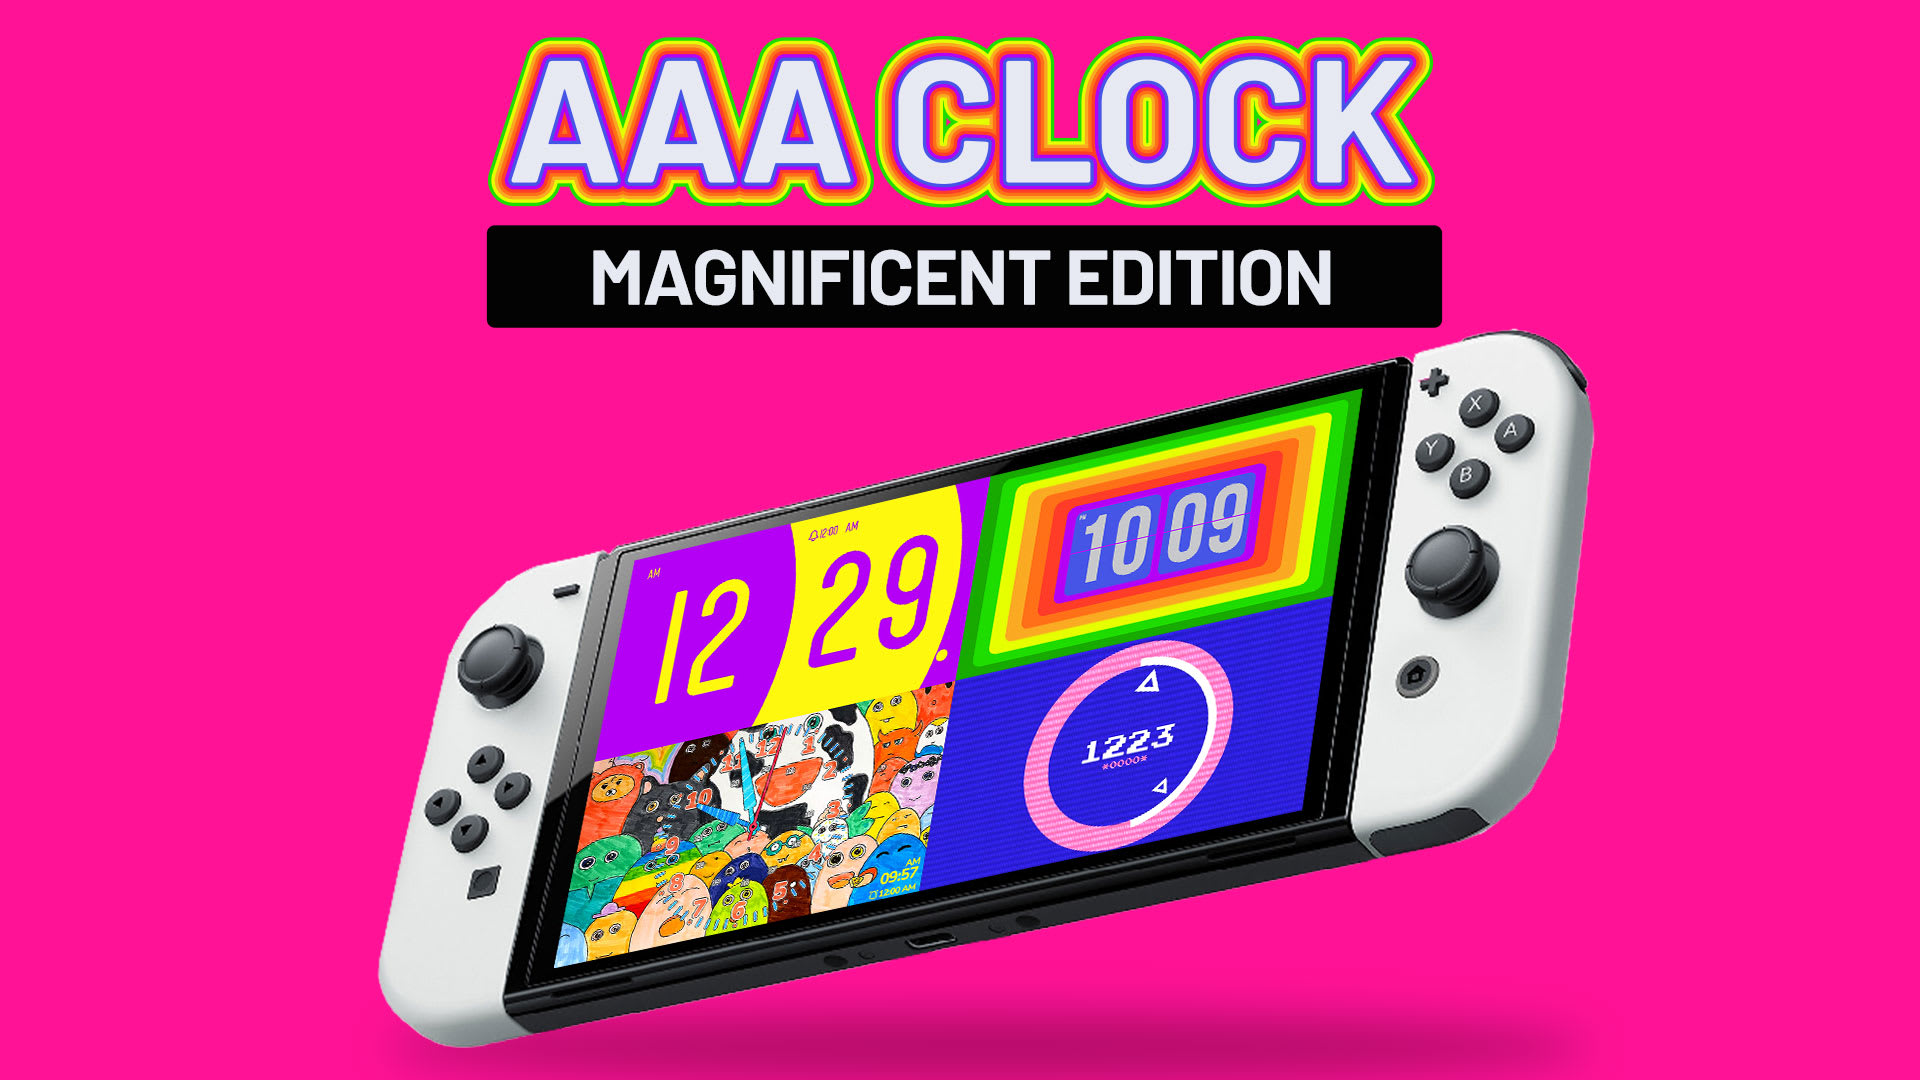 AAA Clock Magnificent Edition